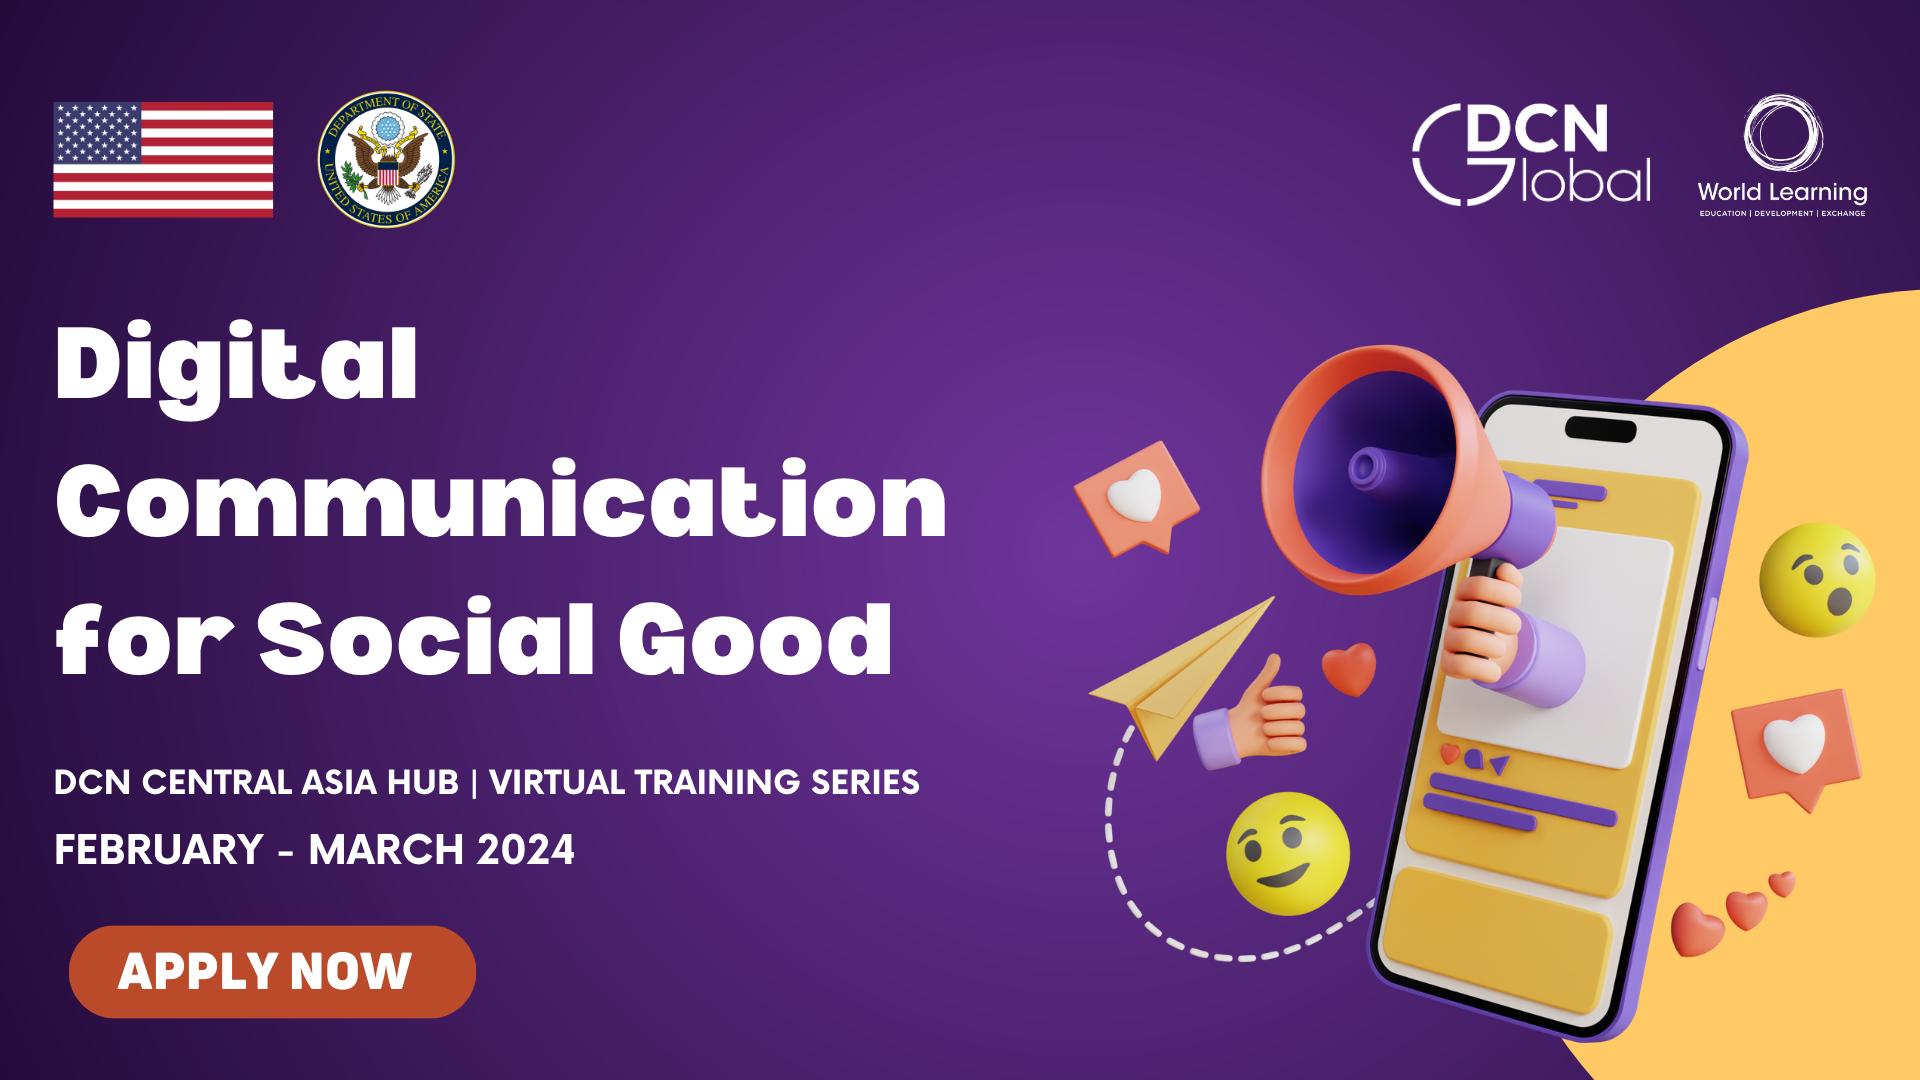 "Digital Communication for Social Good" | Virtual Training Series for Central Asia